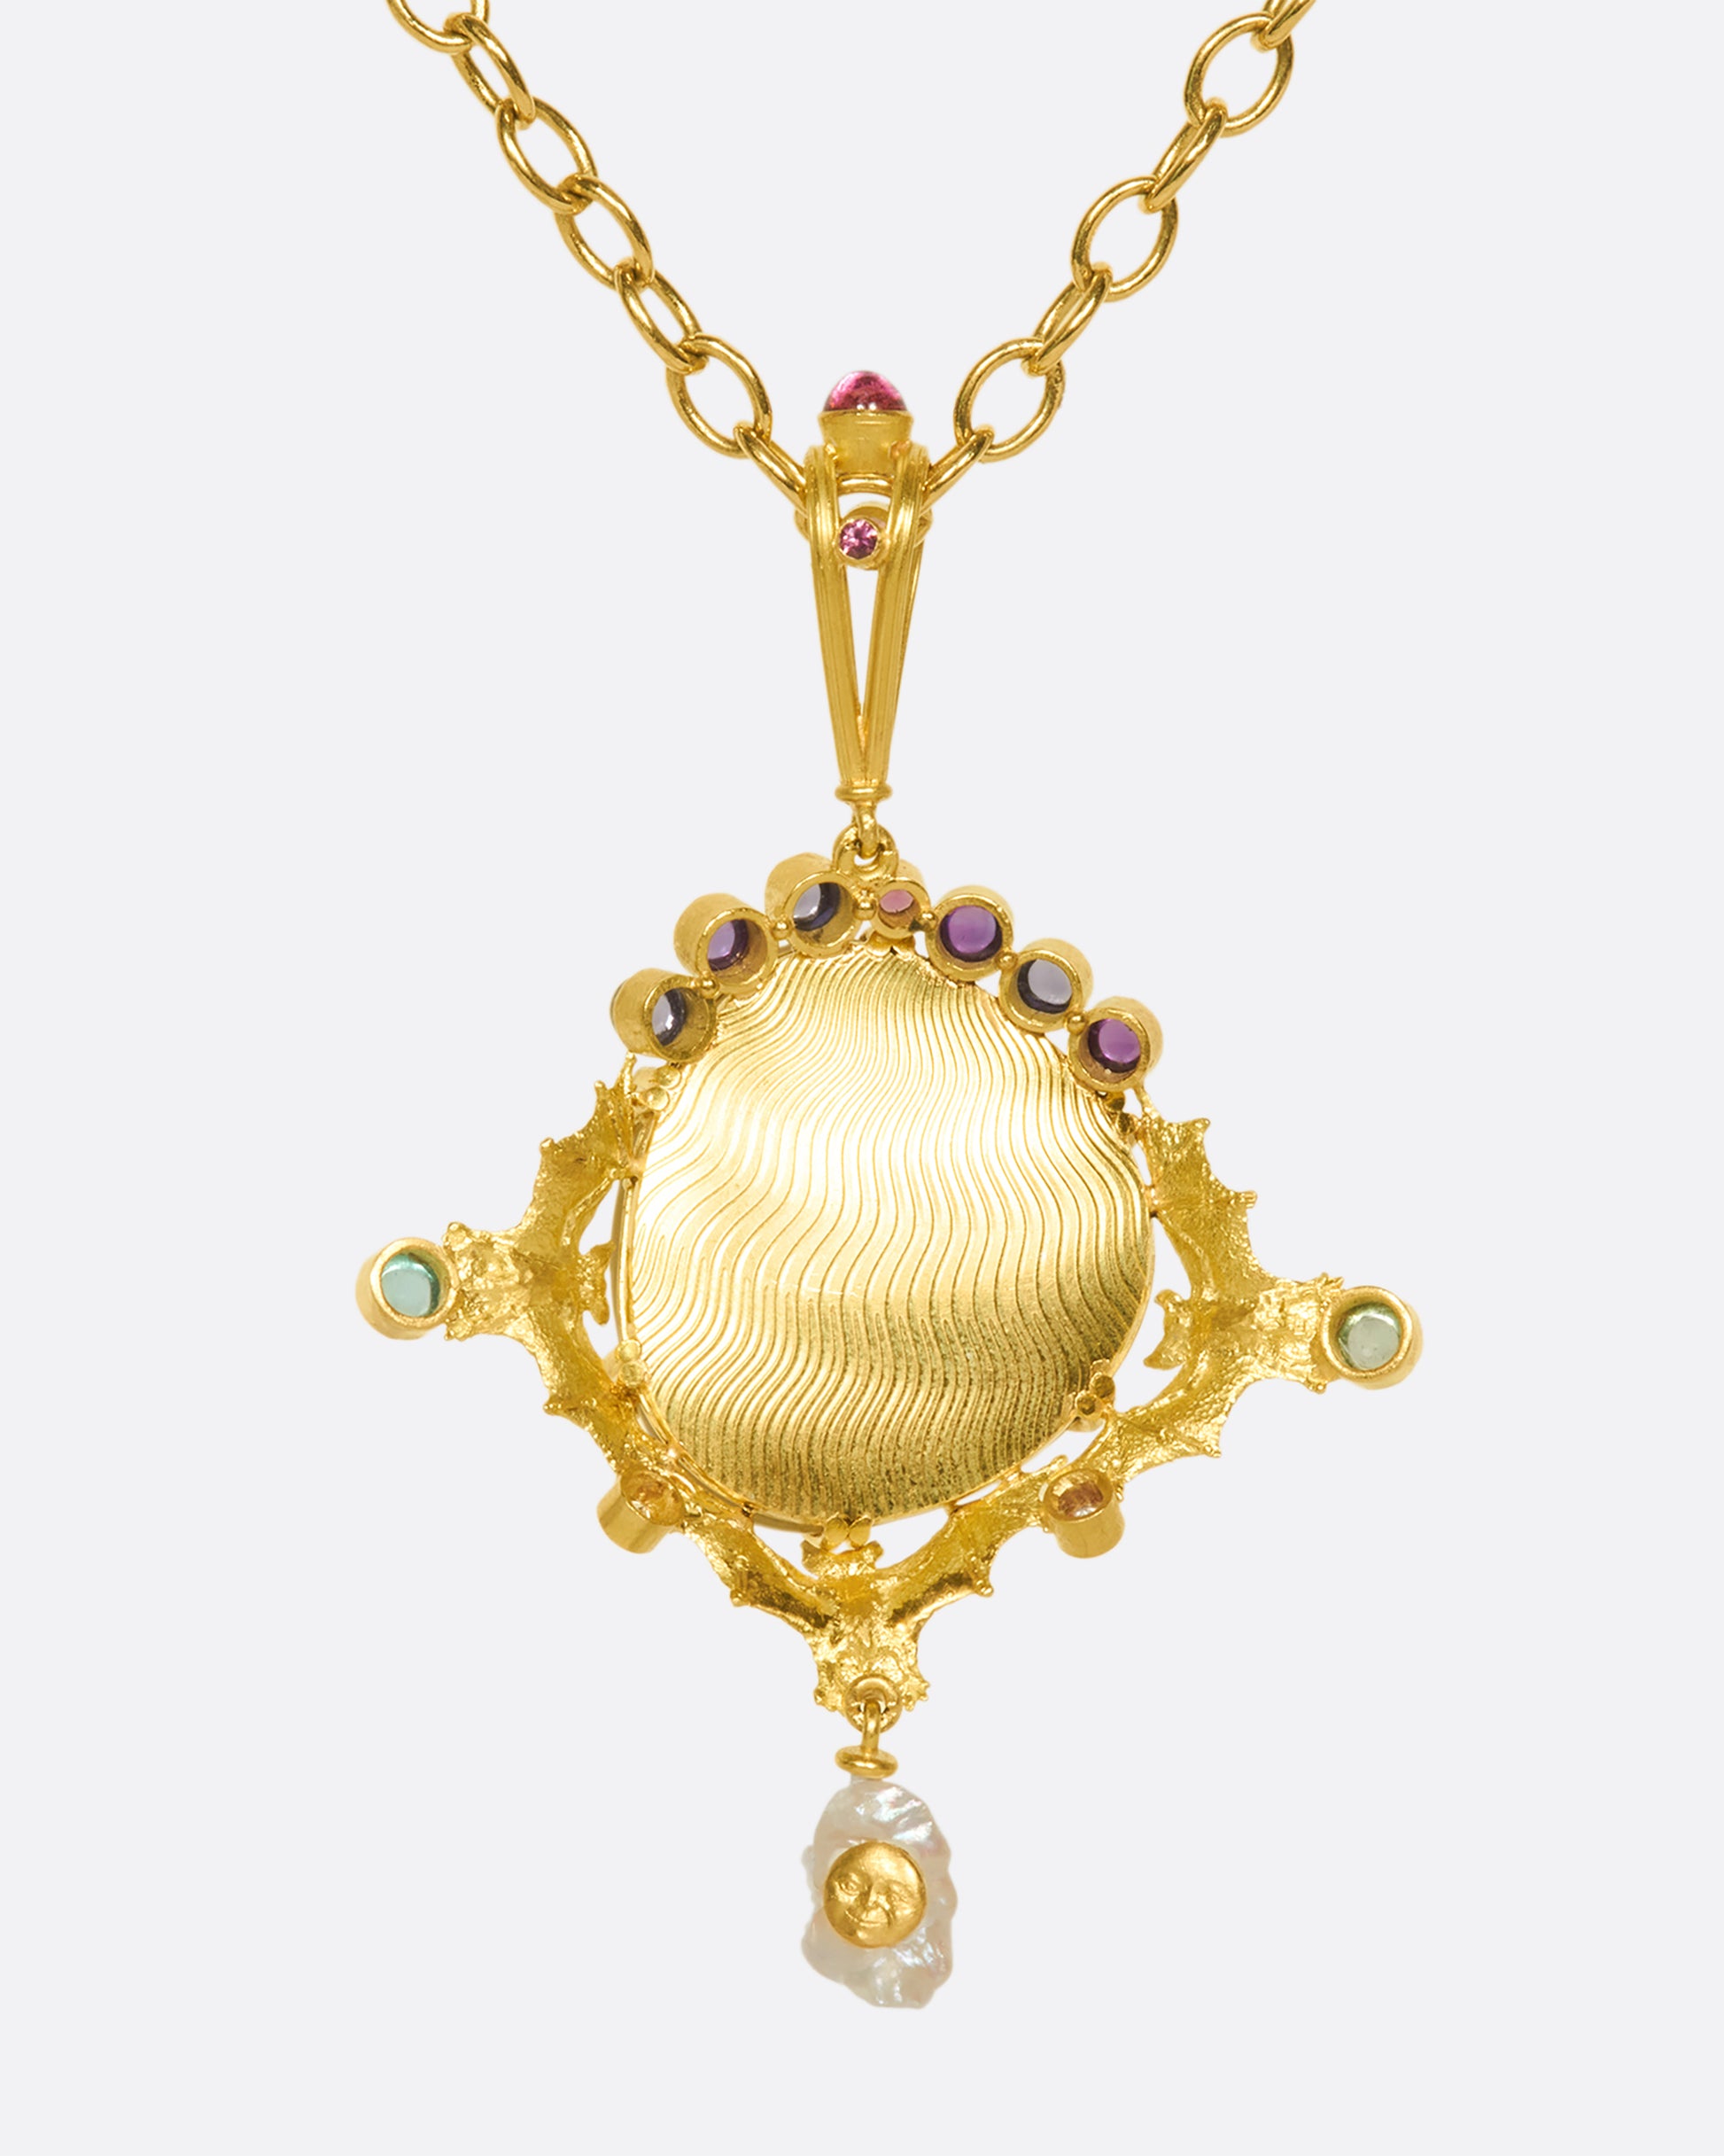 This incredible black opal pendant is held in place by three 18k gold bats and adorned with iolite, tourmaline, amethyst, natural pearl, and diamonds.